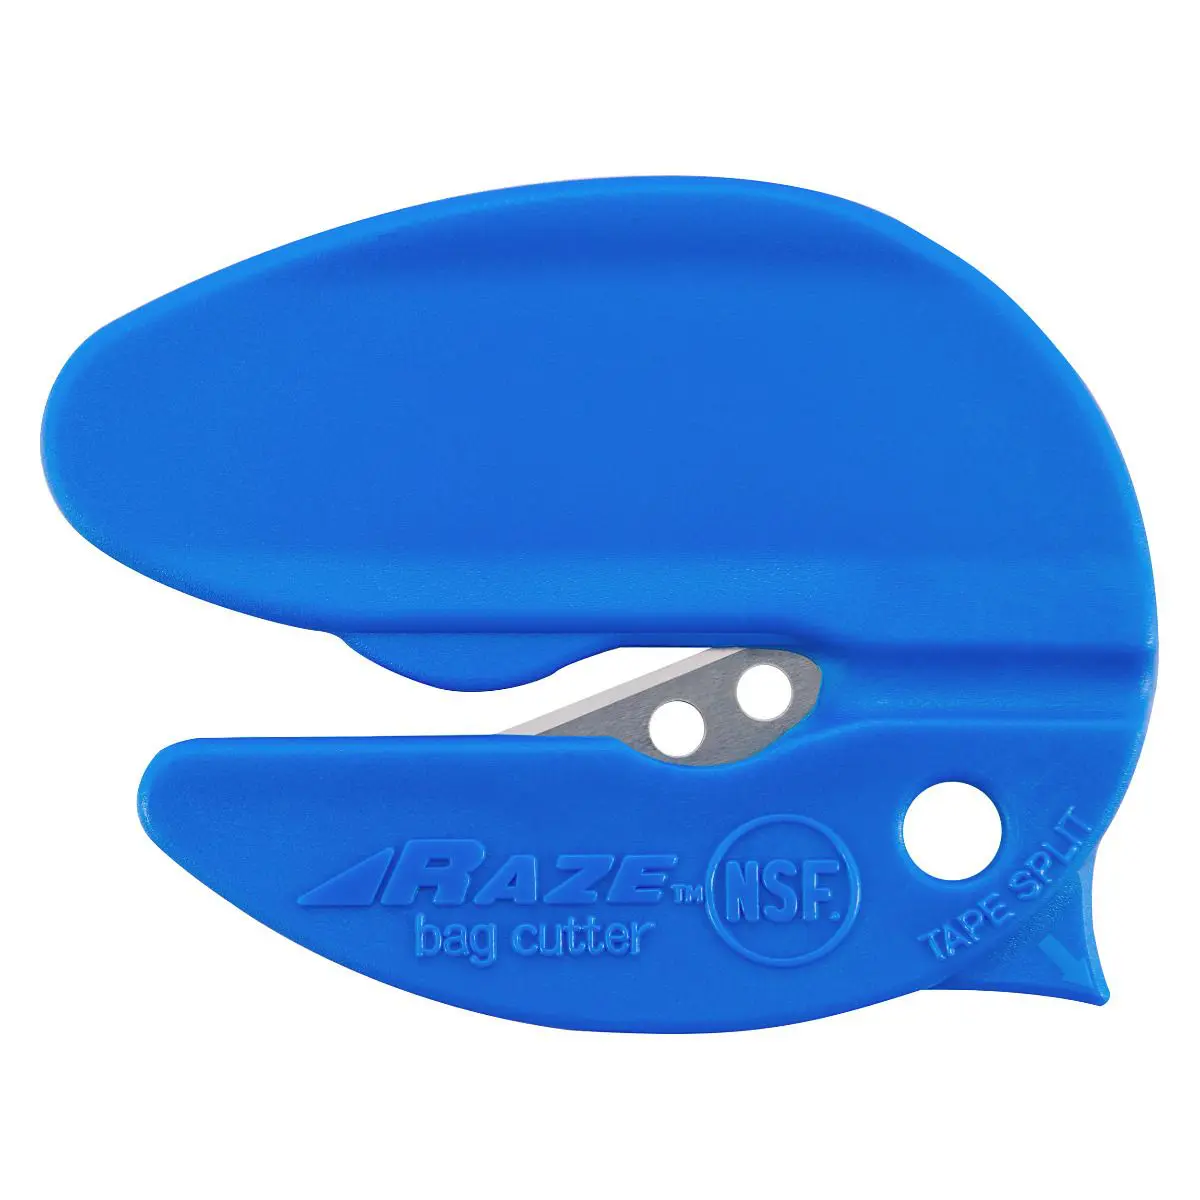 Amazon.com: Pouchmate Red Plastic Food Pouch Bag Cutter Opener for  Commerical Kitchens and Restaurants by Butt Bat : Home & Kitchen